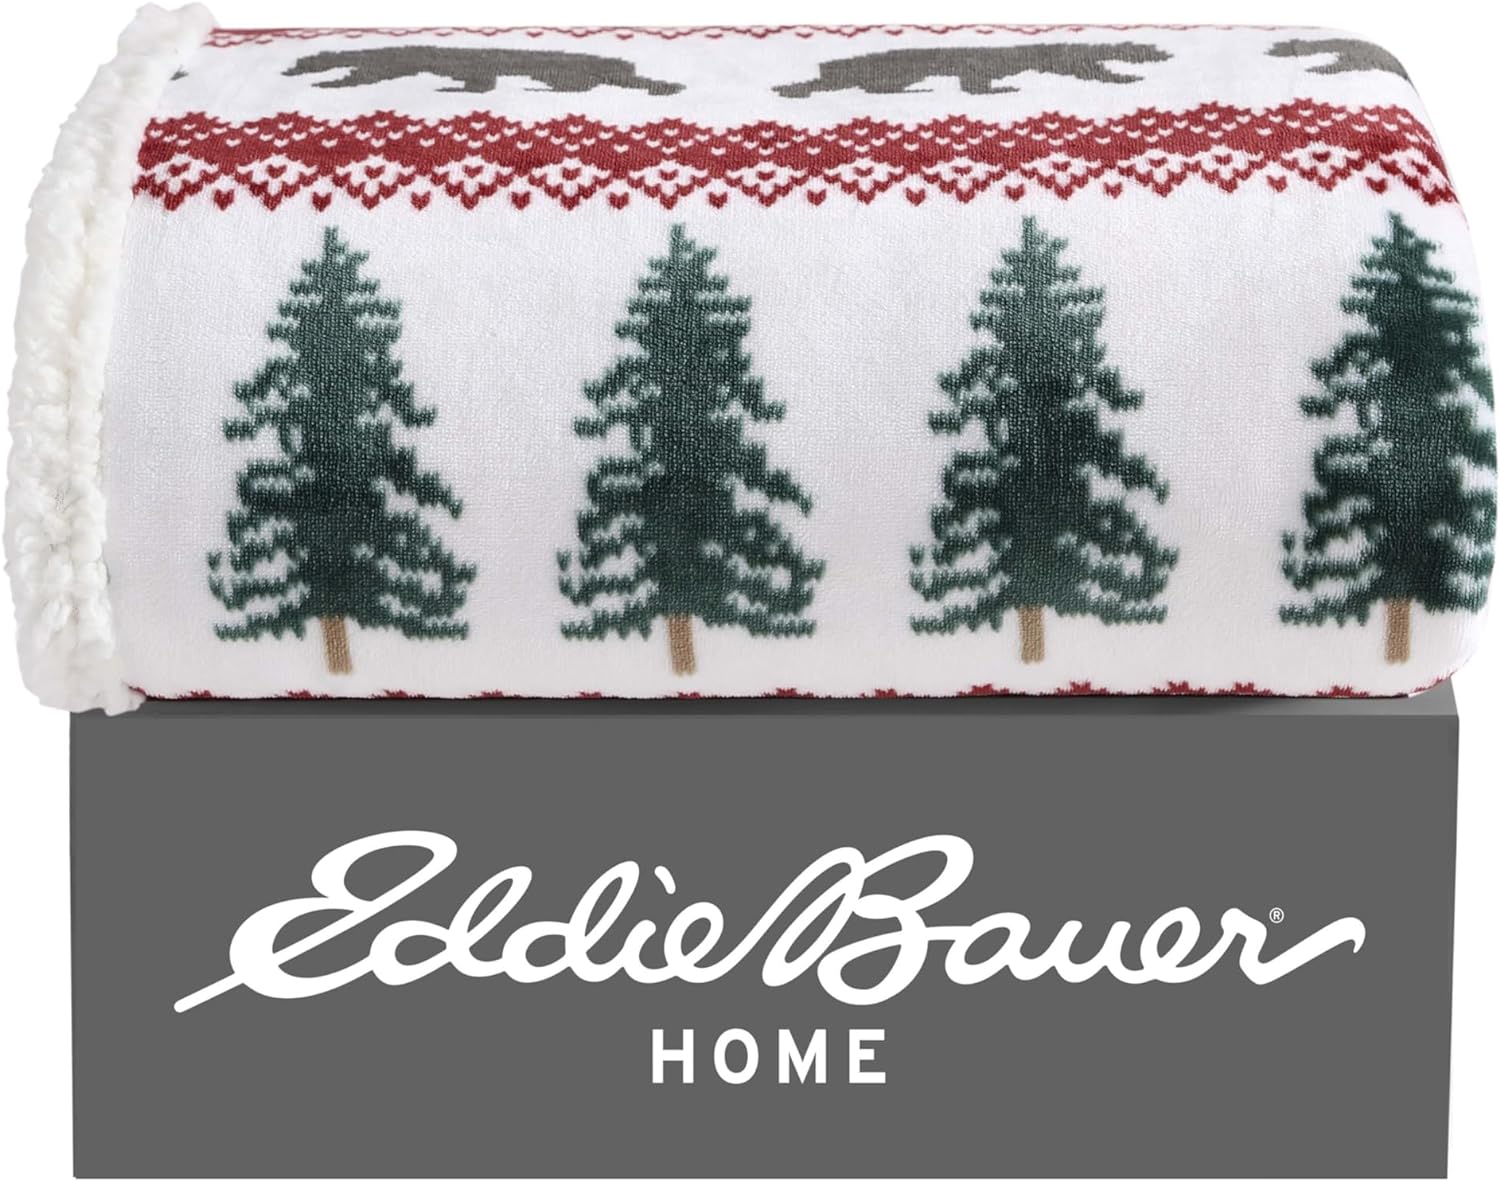 60" x 50" Eddie Bauer Ultra-Plush Collection Reversible Sherpa Fleece Cover Throw Blanket (2 Colors/Patterns) $14.70 + Free Shipping w/ Prime or on $35+